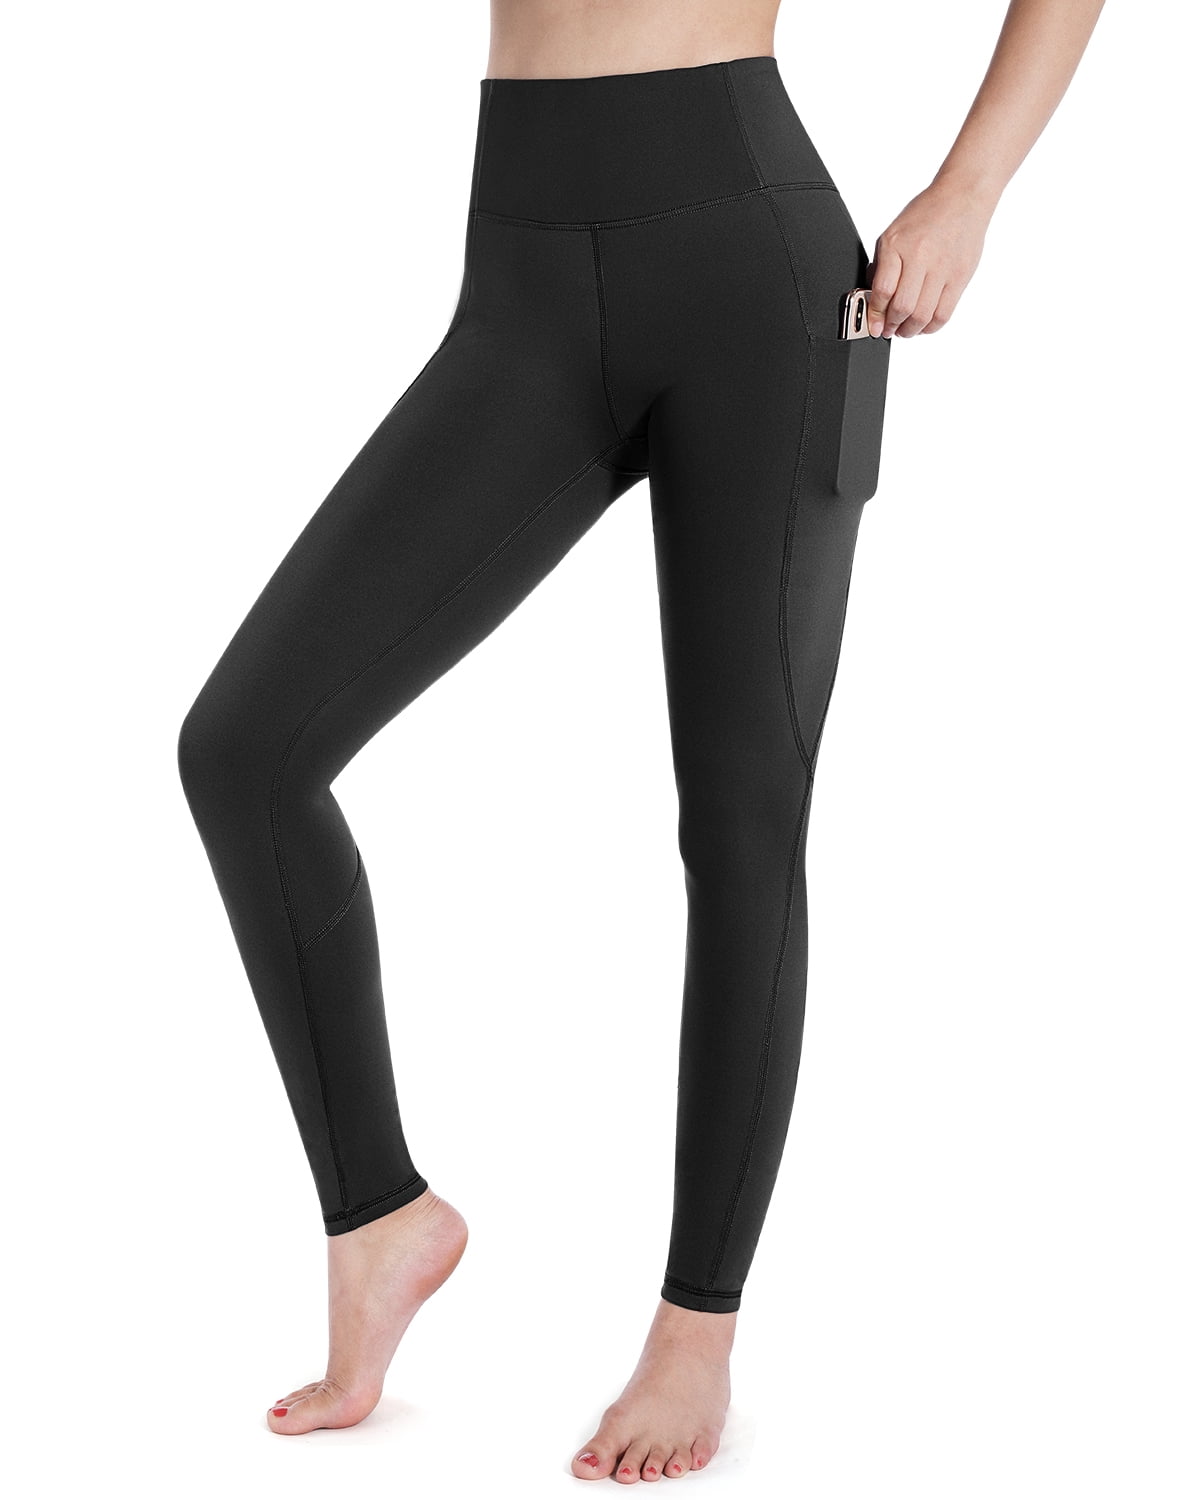 Lacrosse Crossed Sticks Women's Yoga Pants High Waist Leggings with Pockets  Gym Workout Tights